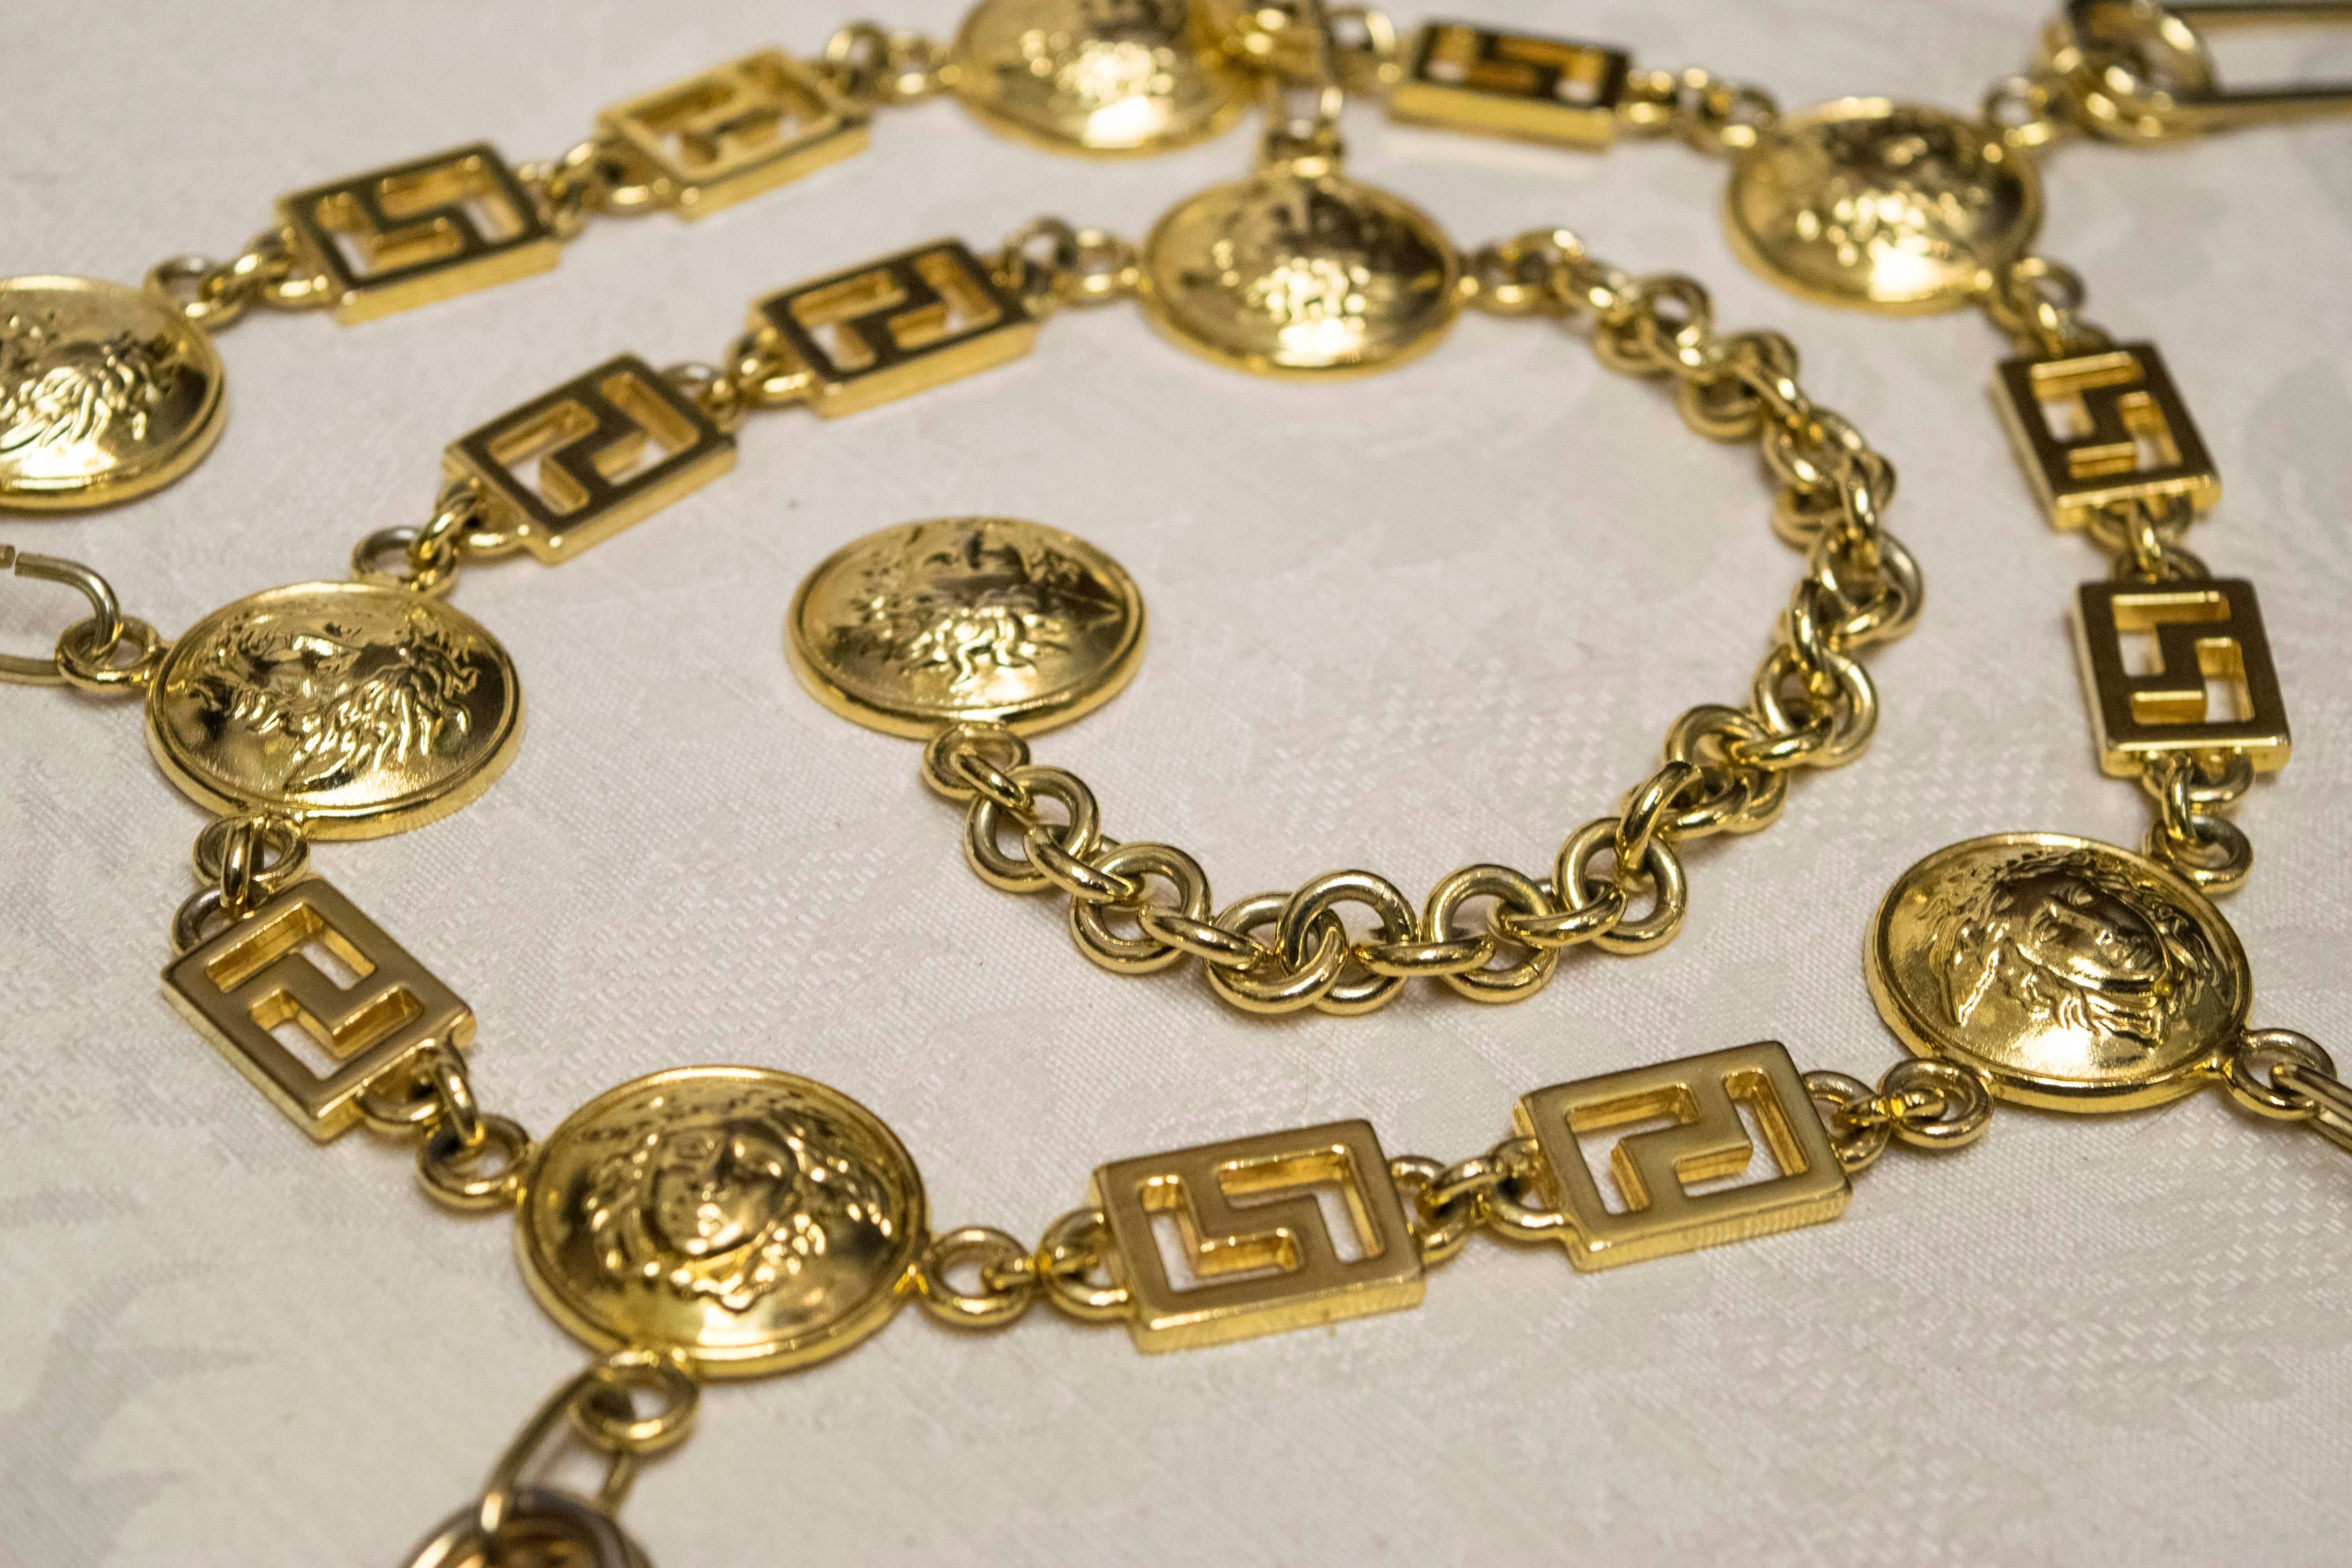 Gianni Versace Gold Toned Chain Belt Iconic Medusas and Safety Pins.

An iconic Gianni Versace belt from the 1980s. The piece is unstamped, but come with original bag. 

The piece extends 25 inches - 30 inches. 